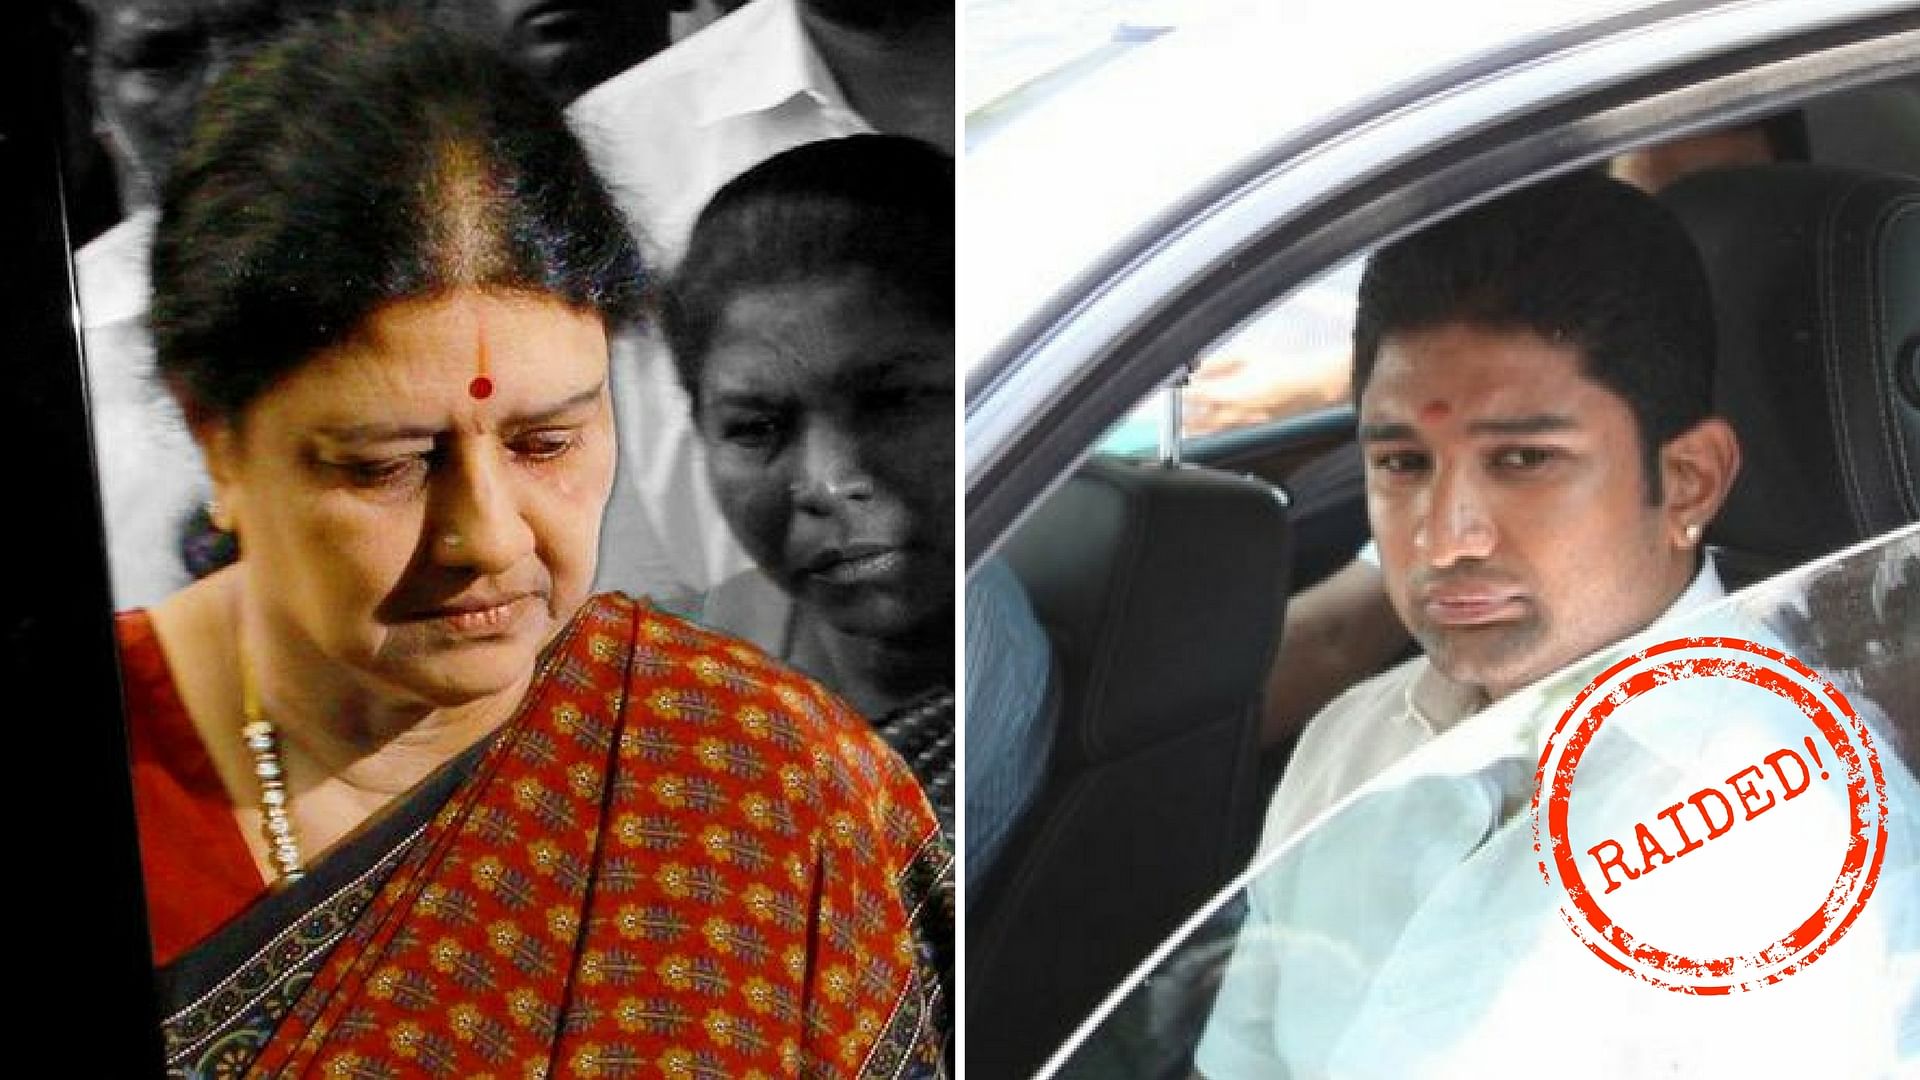 Over 188 locations, connected with VK Sasikala and her relatives, were raided by Income Tax Department officials.